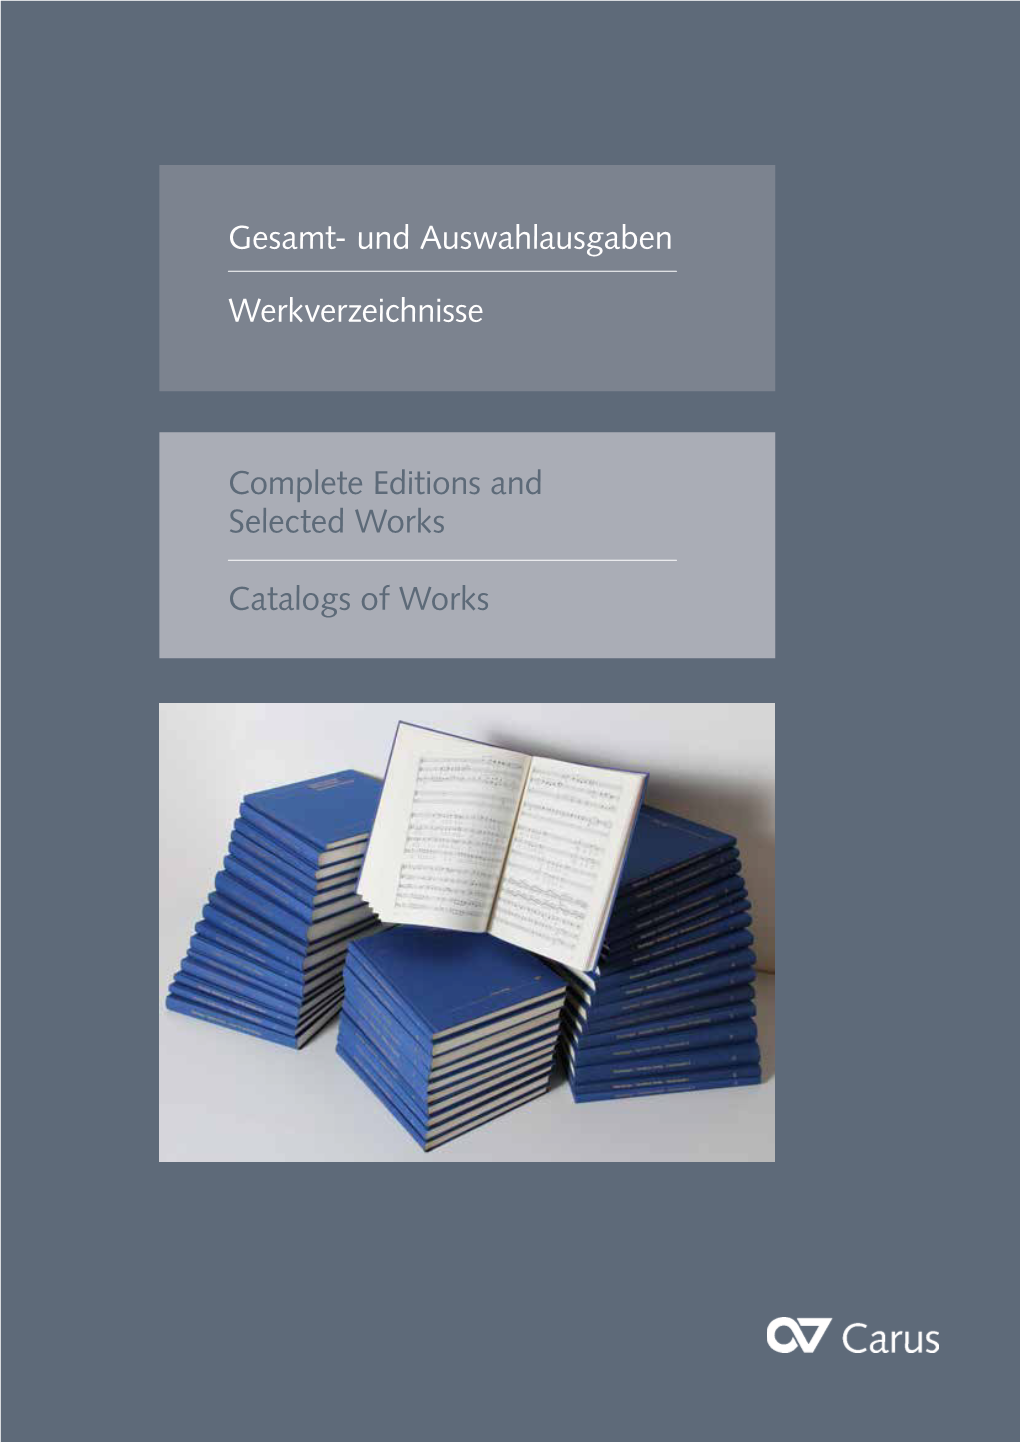 Complete Editions and Selected Works Catalogs of Works Gesamt